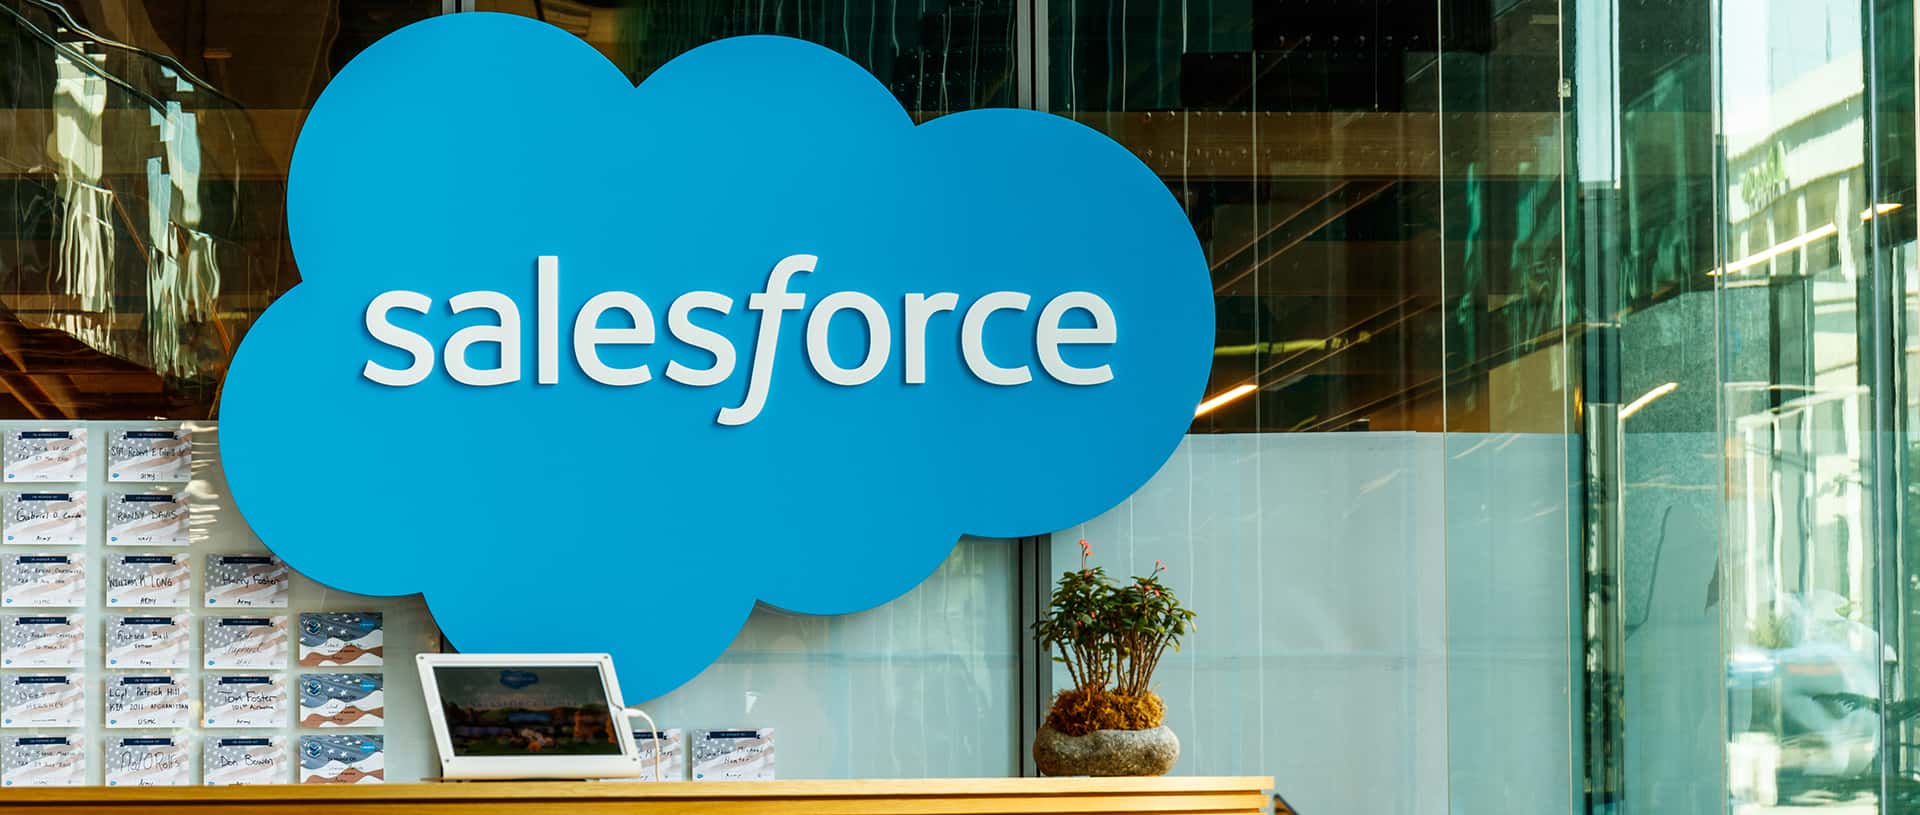 How Salesforce attained its clout in cloud computing in SEA